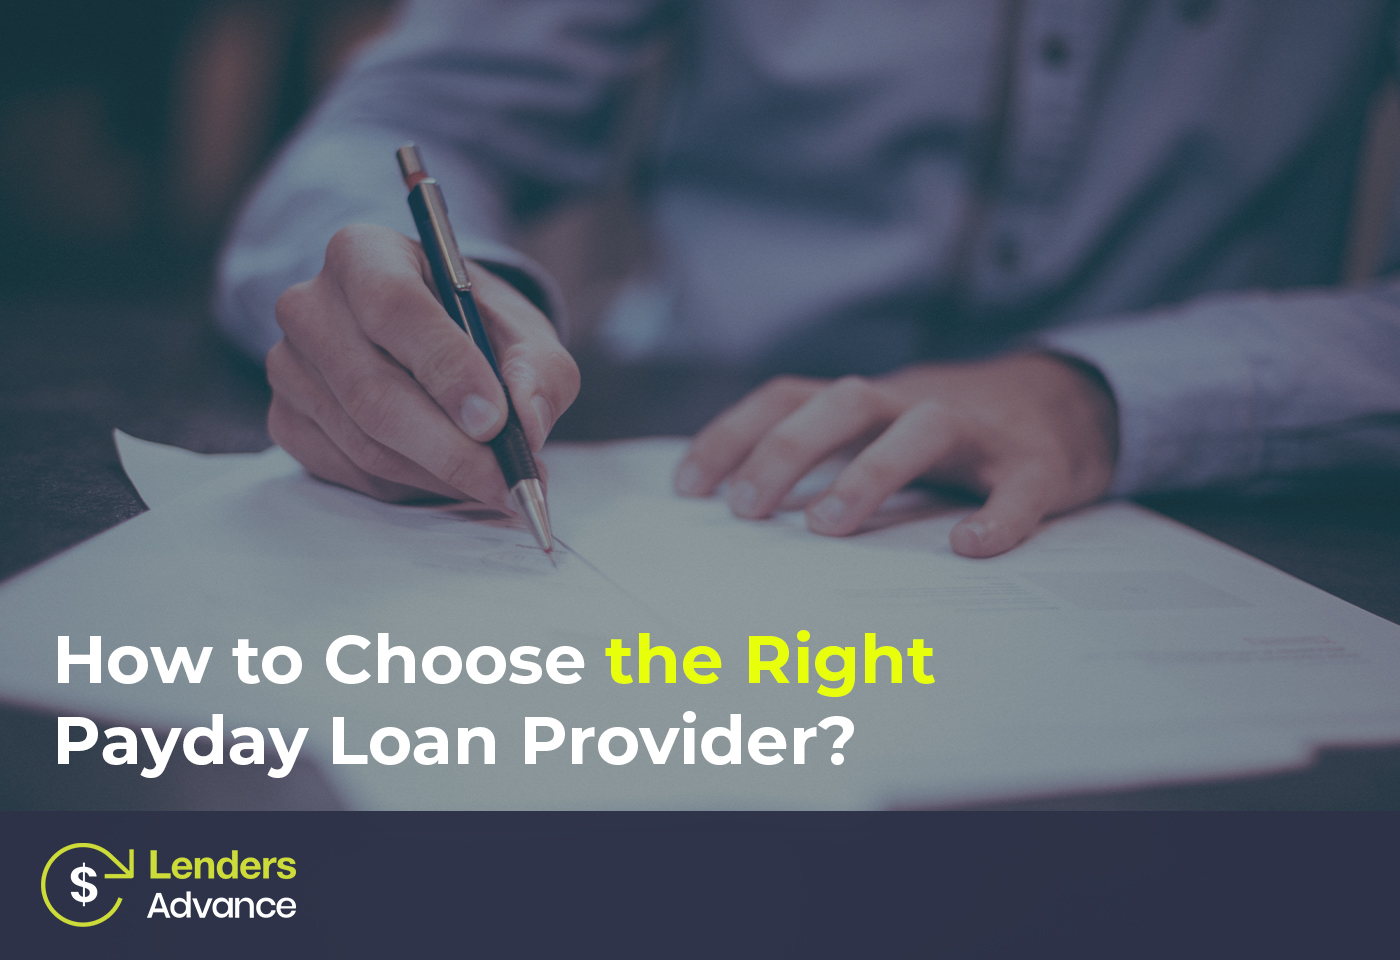 How to Choose the Right Payday Loan Provider?